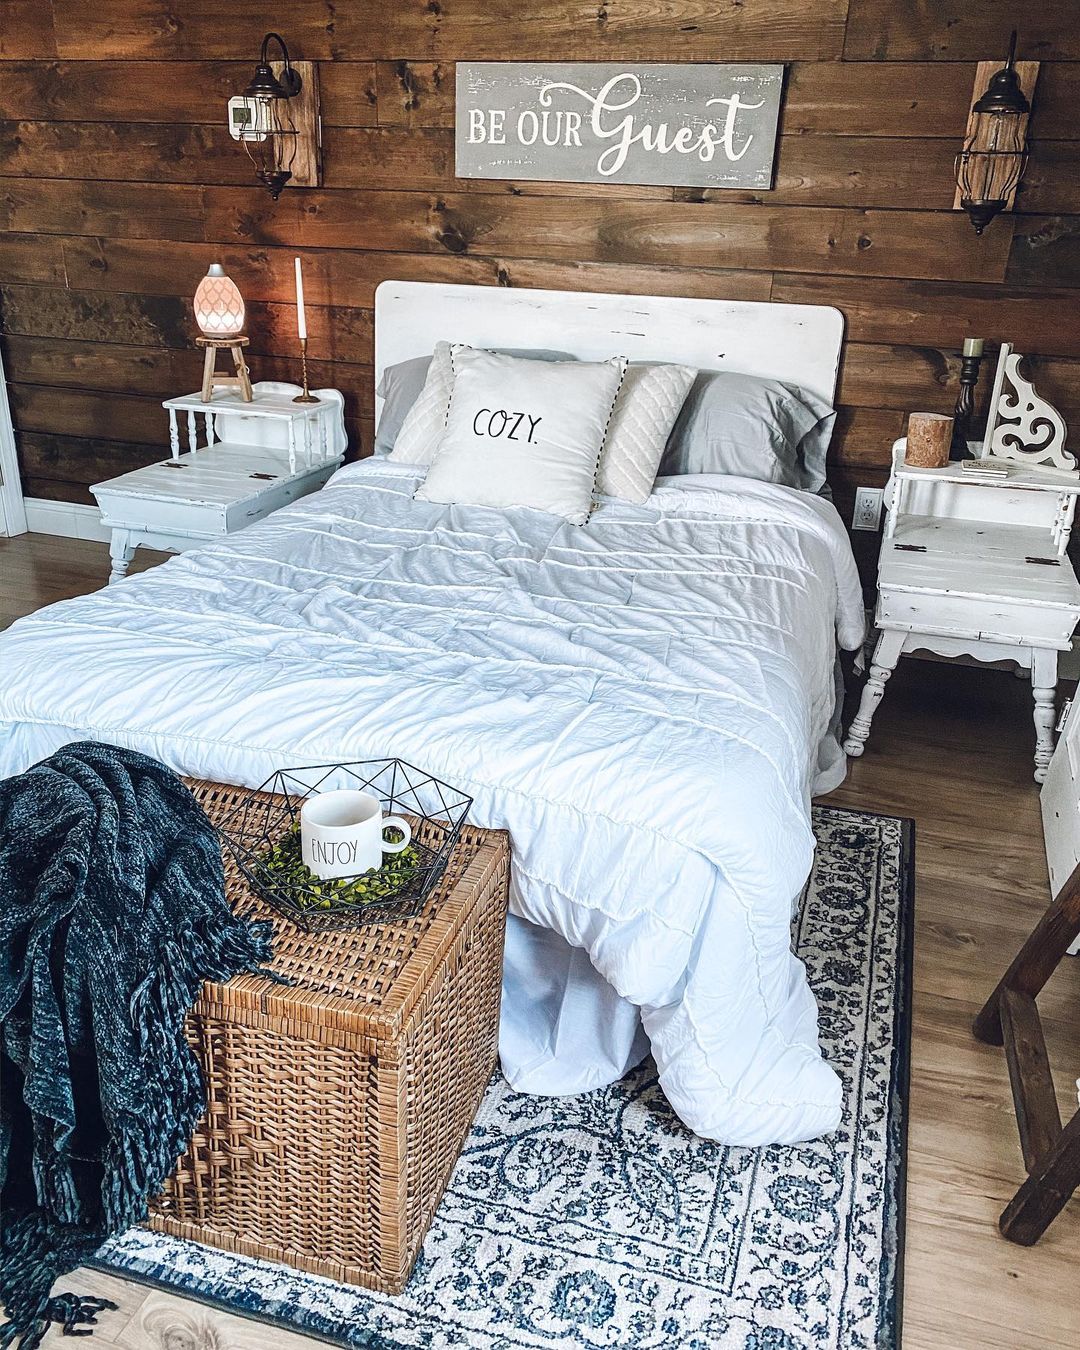 Farmhouse Bedroom with wooden walls, white bed, wicker trunk and blue throw 